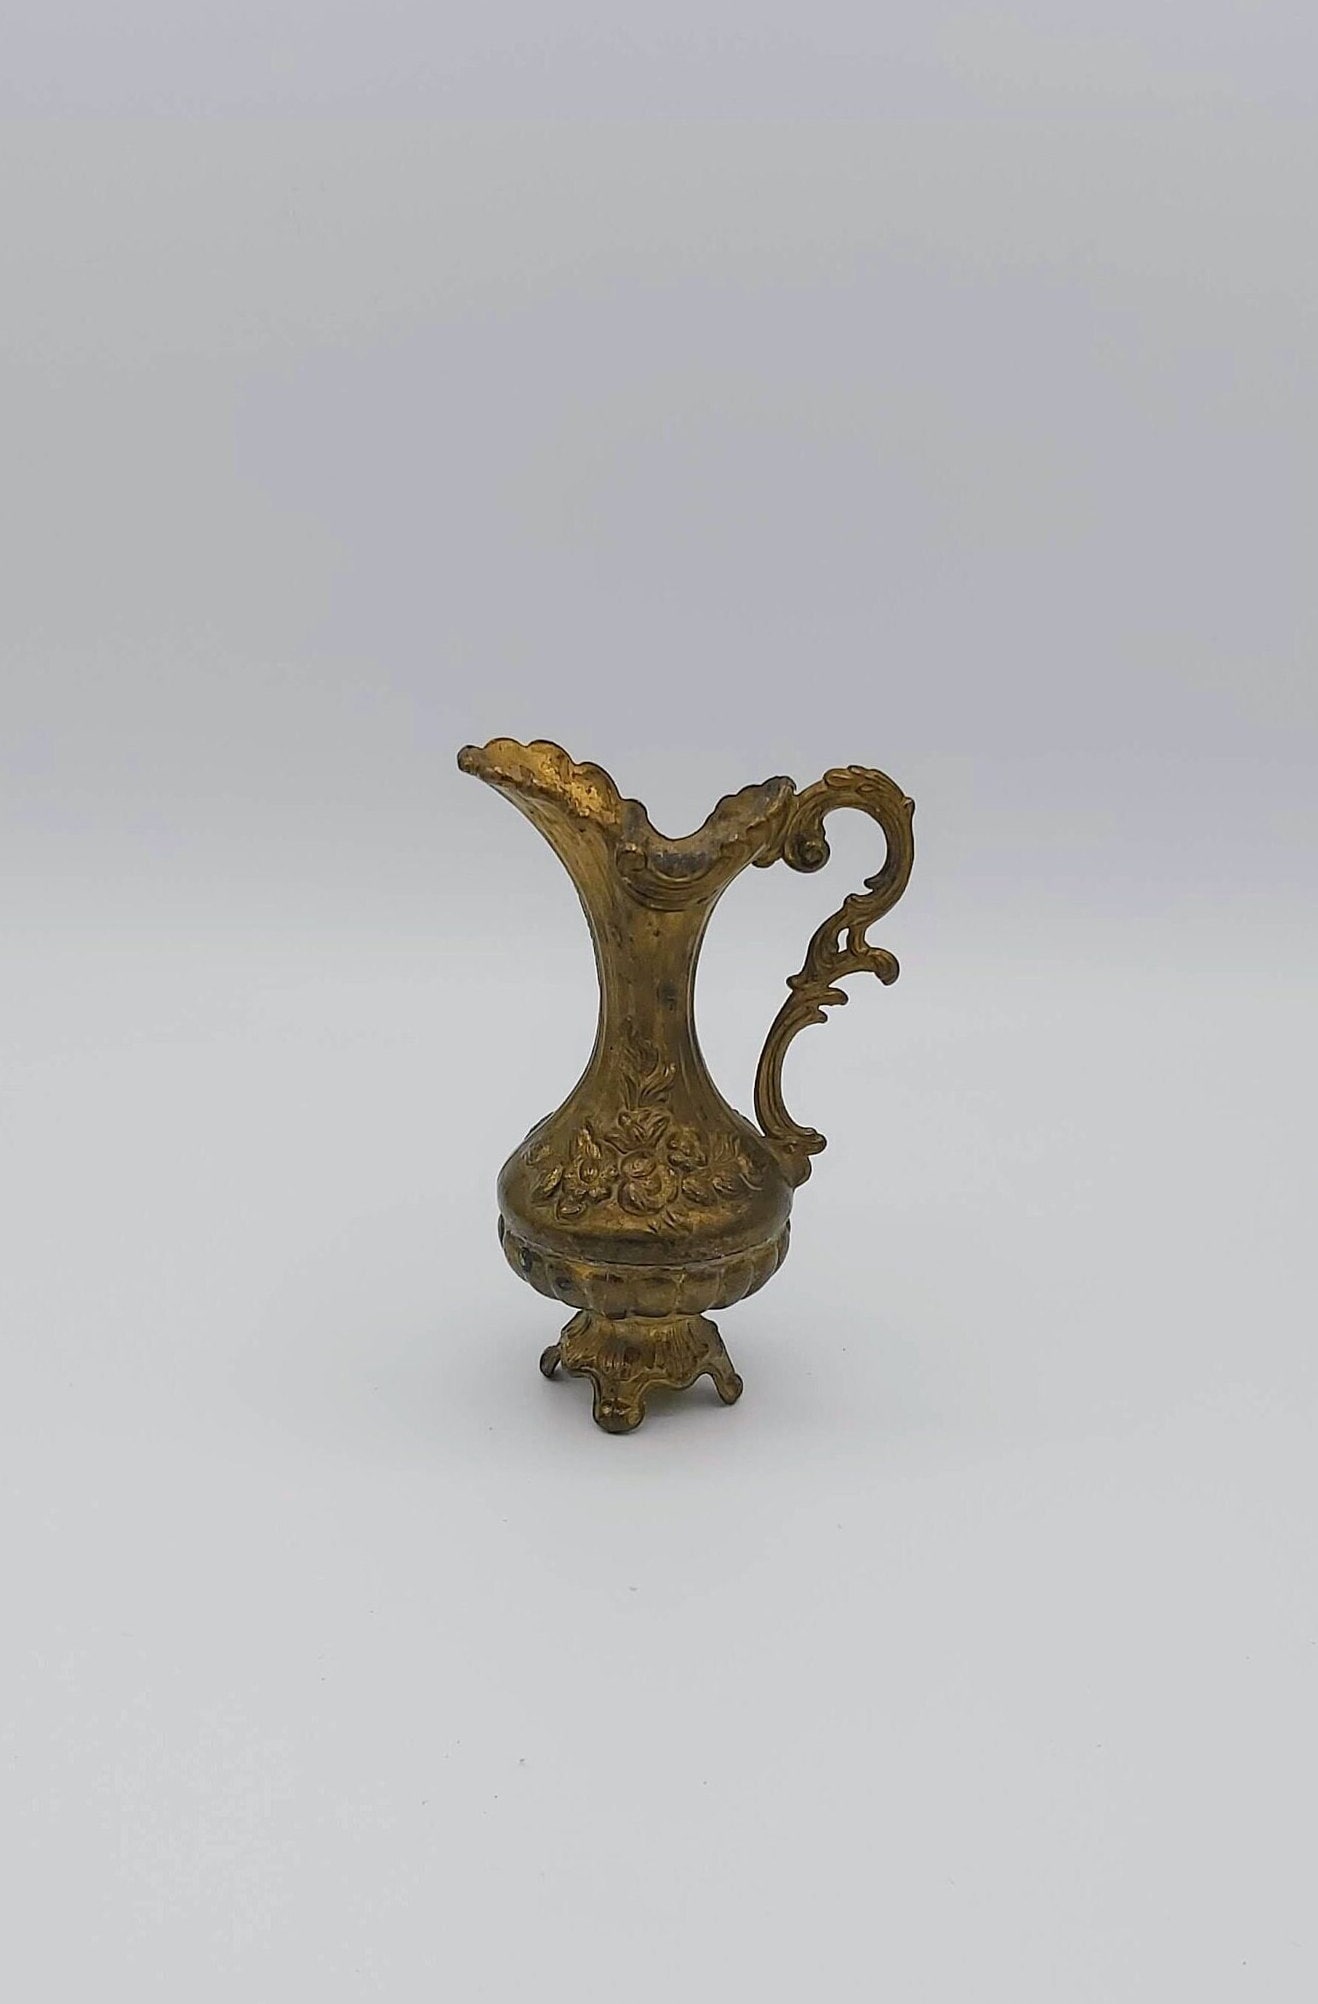 Buy Brass Italy Decor Online In India -  India